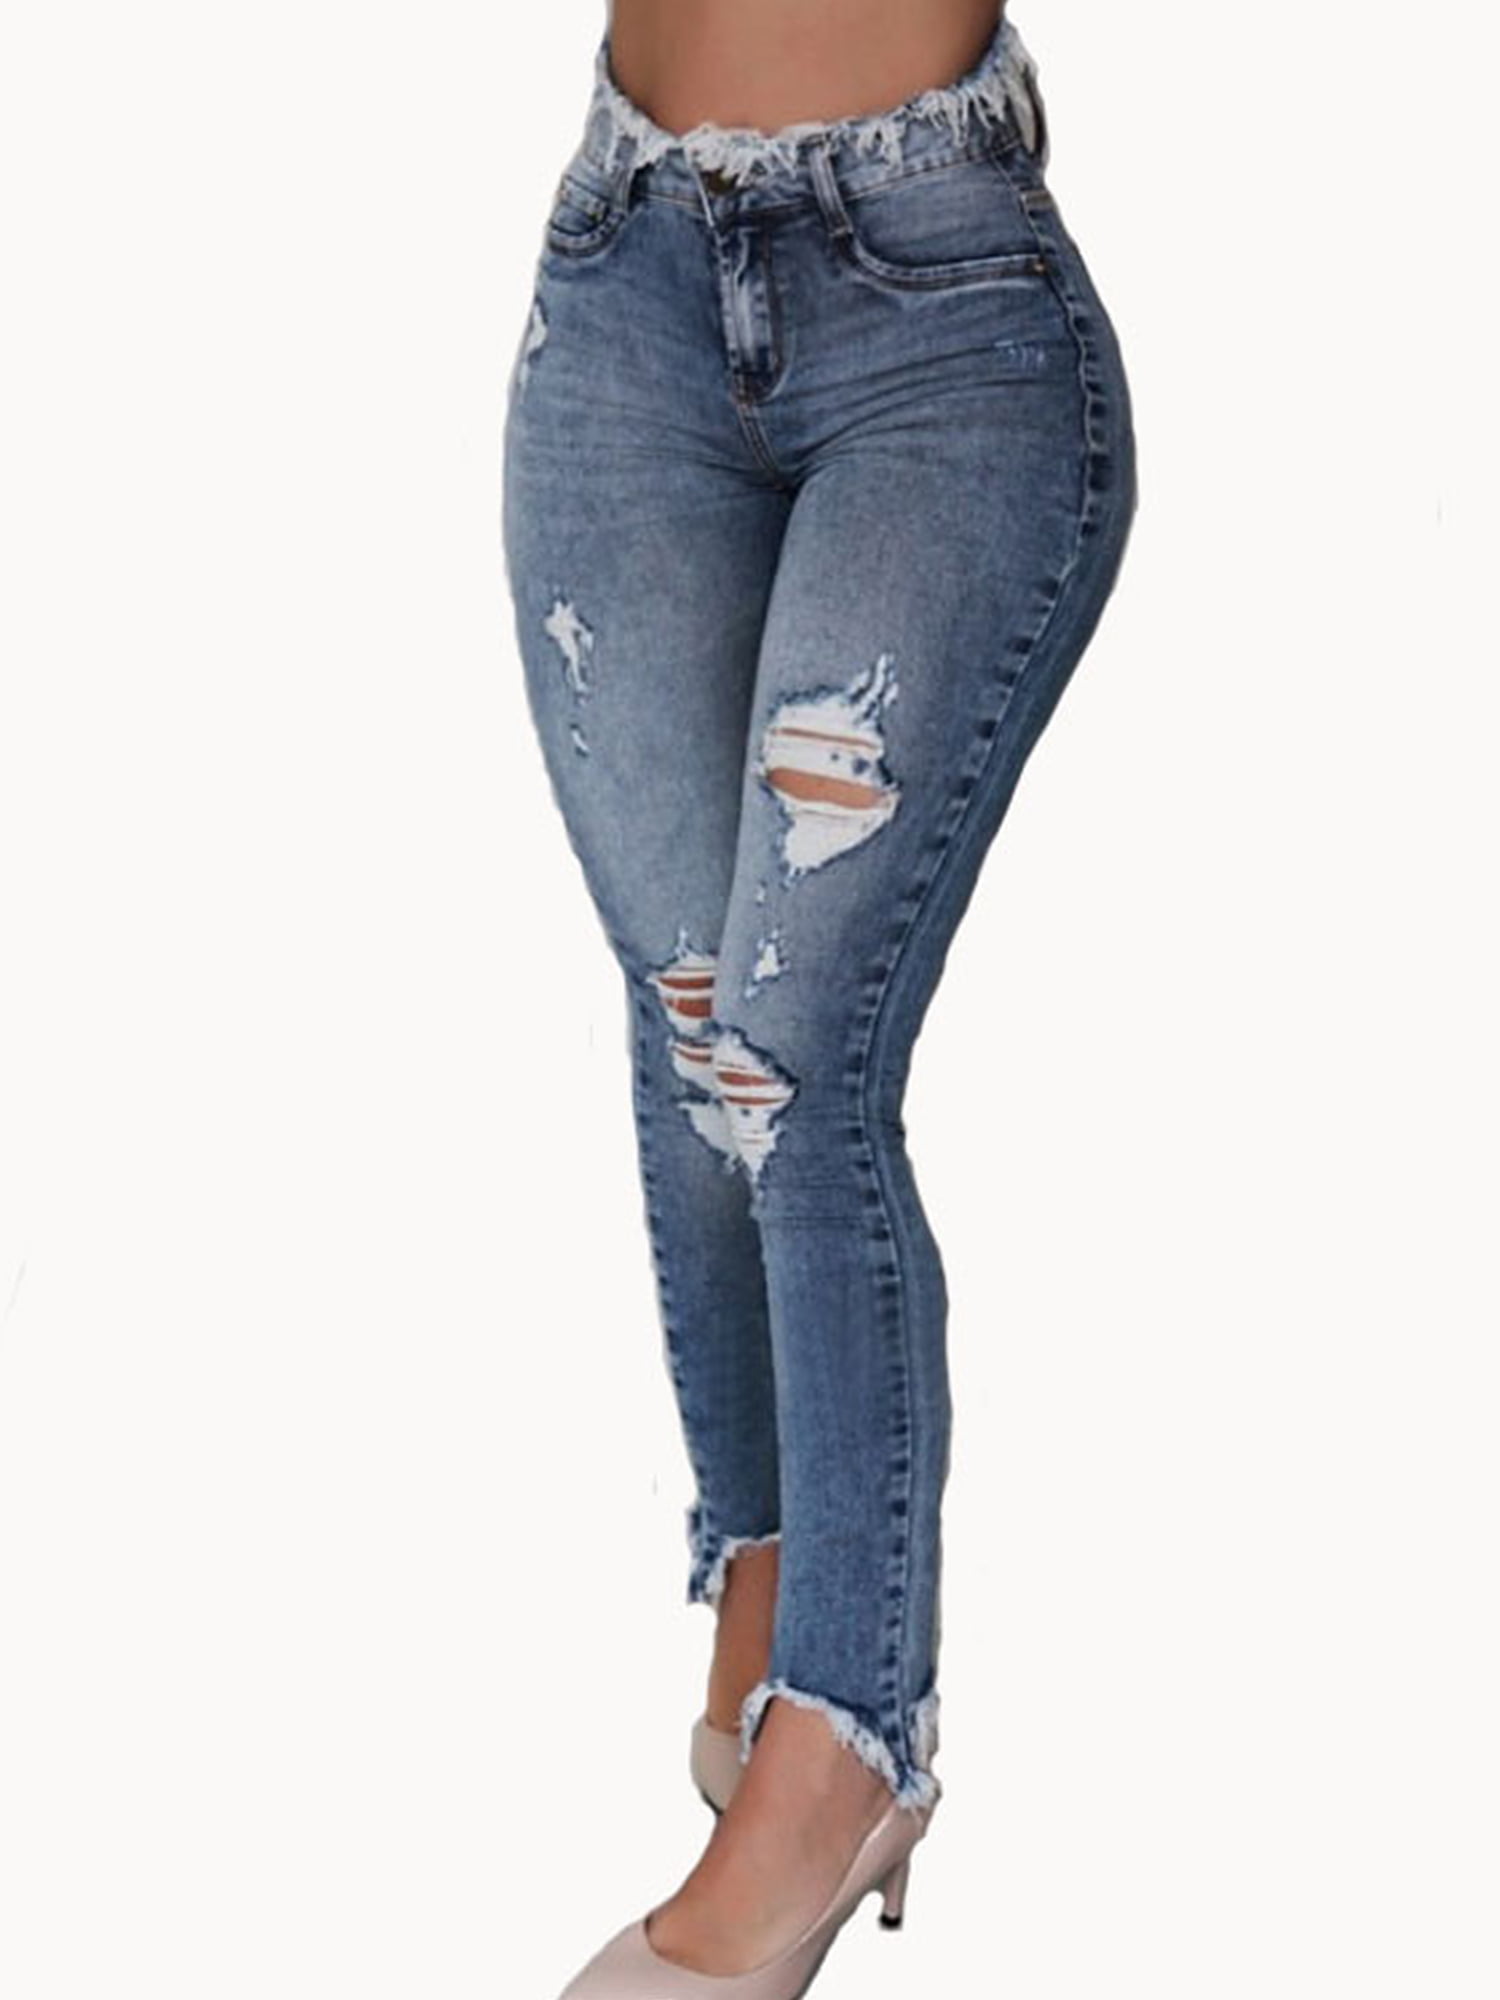 New Women Stretch Ripped Jeans Denim Pants Jeggings Casual Slim Skinny Trousers 